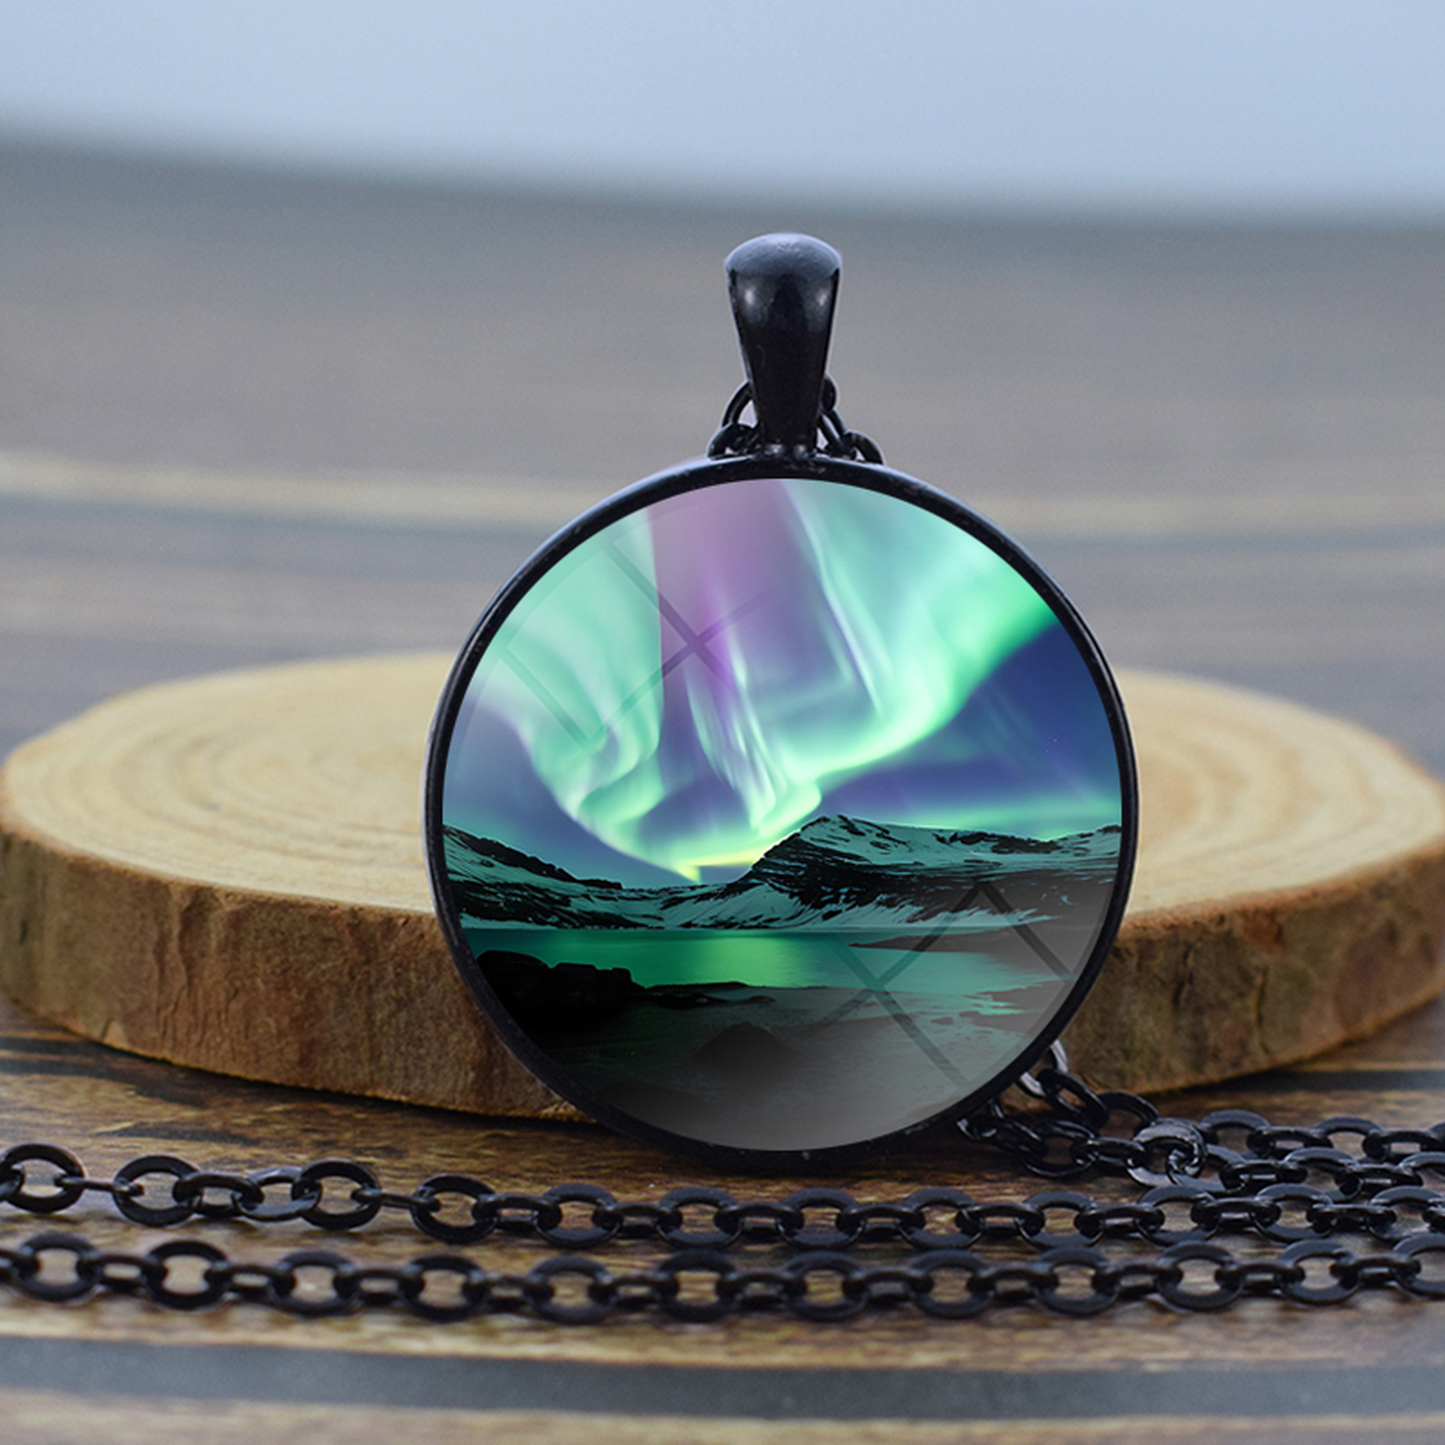 Unique Aurora Borealis Black Necklace - Northern Light Jewelry - Glass Dome Pendent Necklace - Perfect Aurora Lovers Gift 5